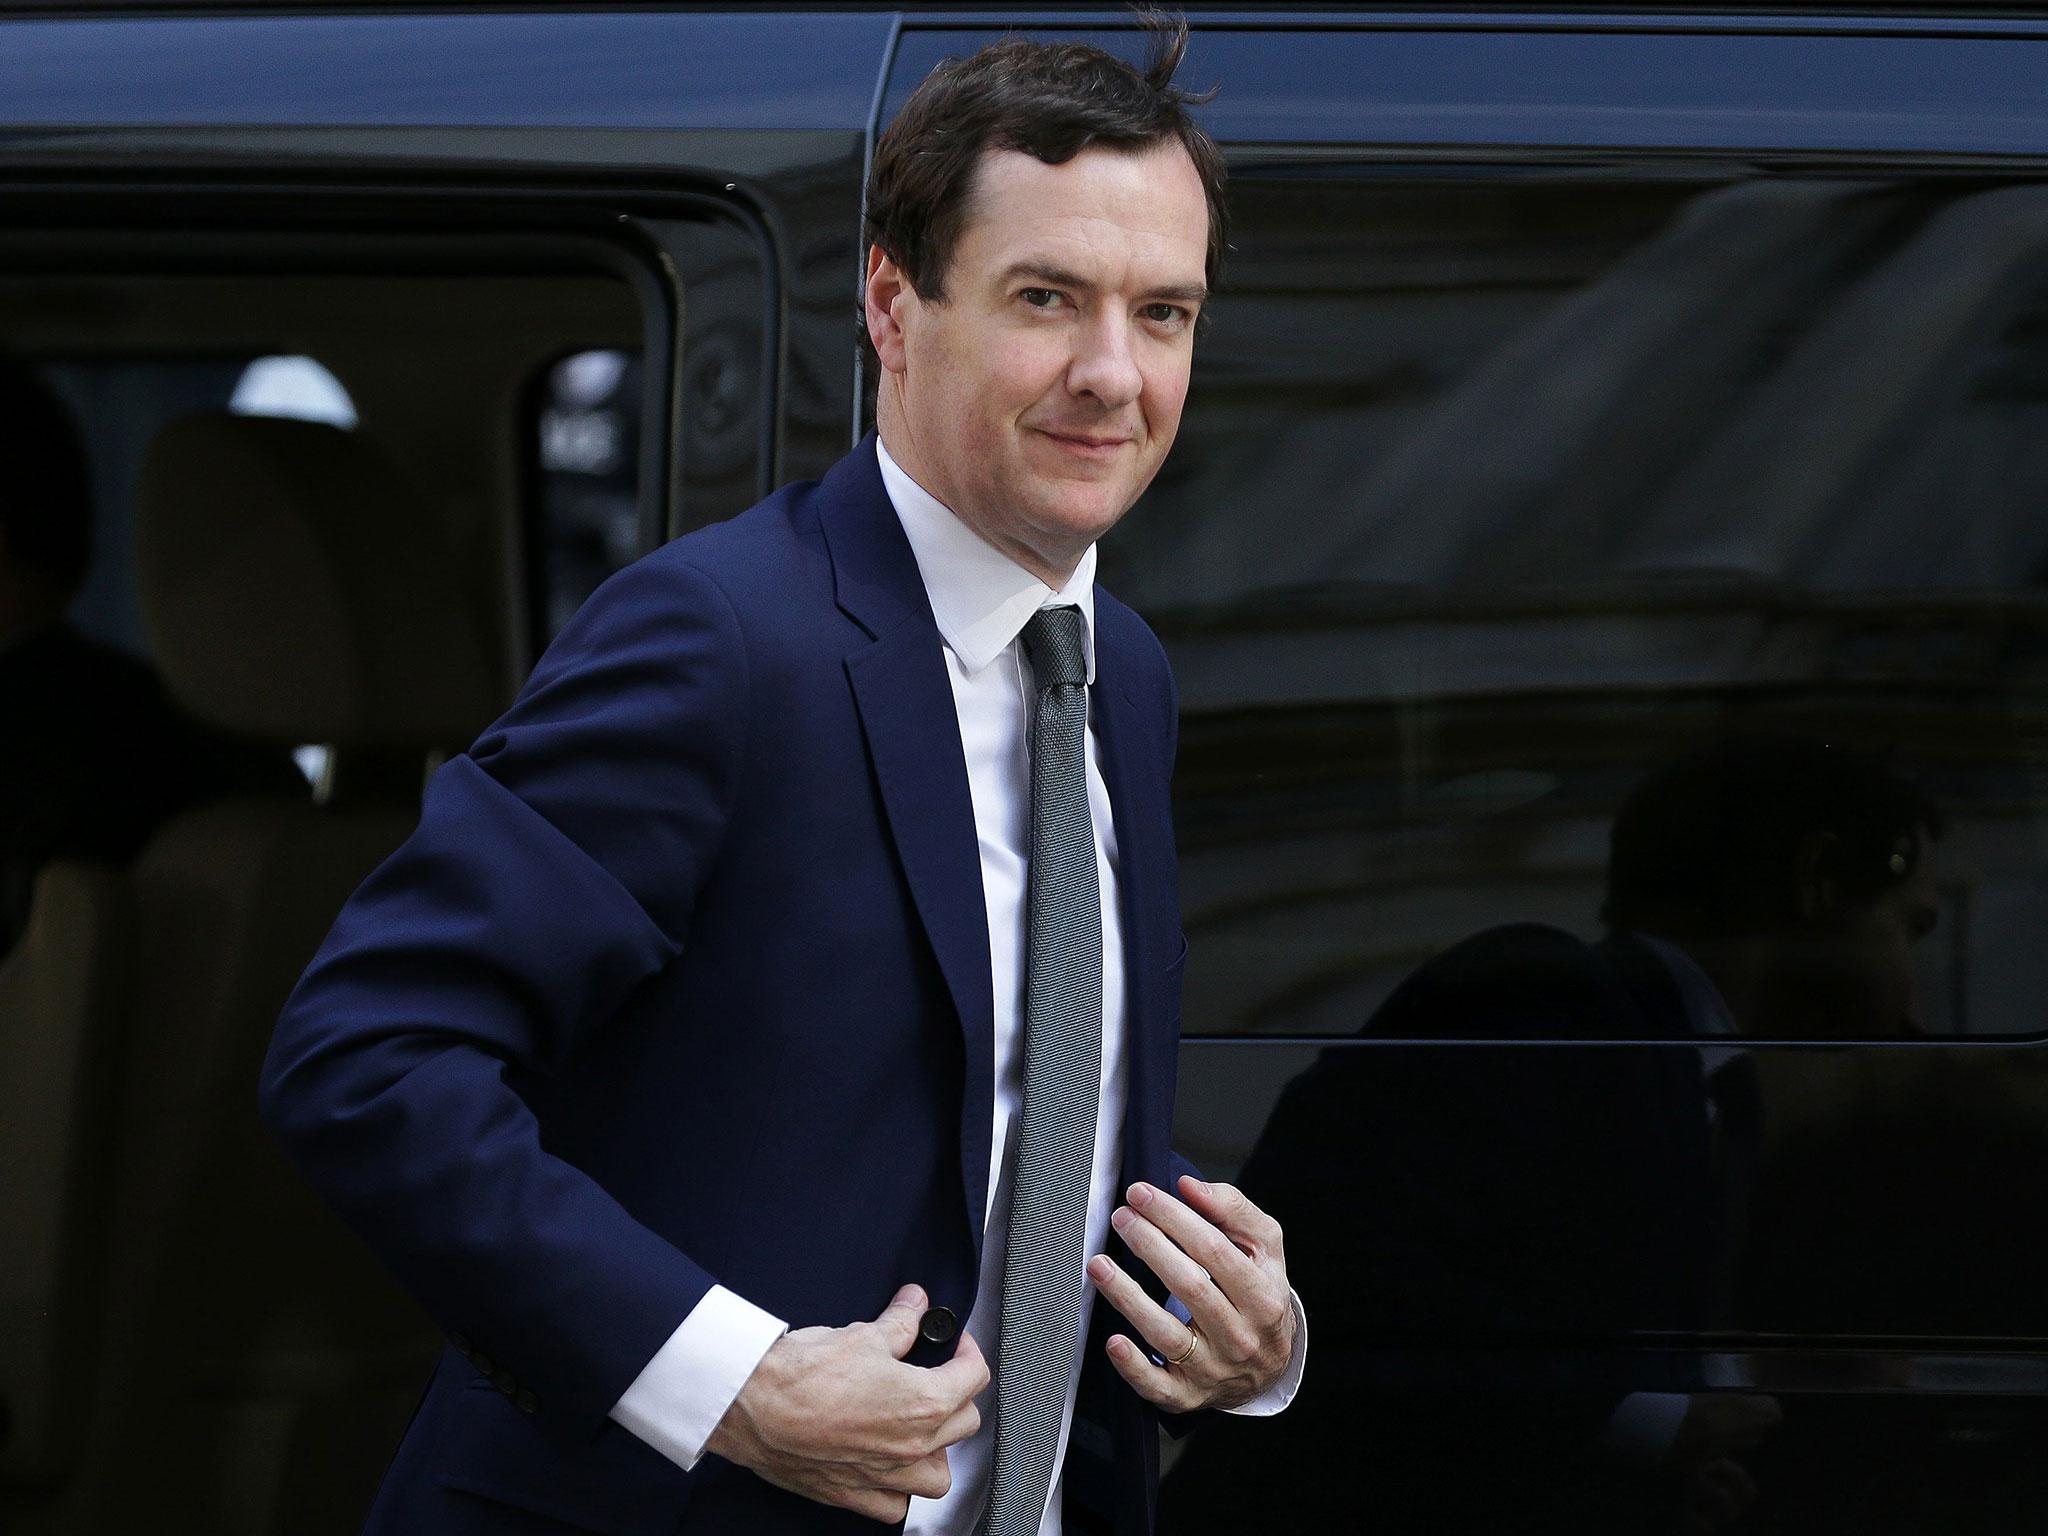 MPs said Mr Osborne had set an ‘unhelpful example’ in taking the job of editor at the newspaper